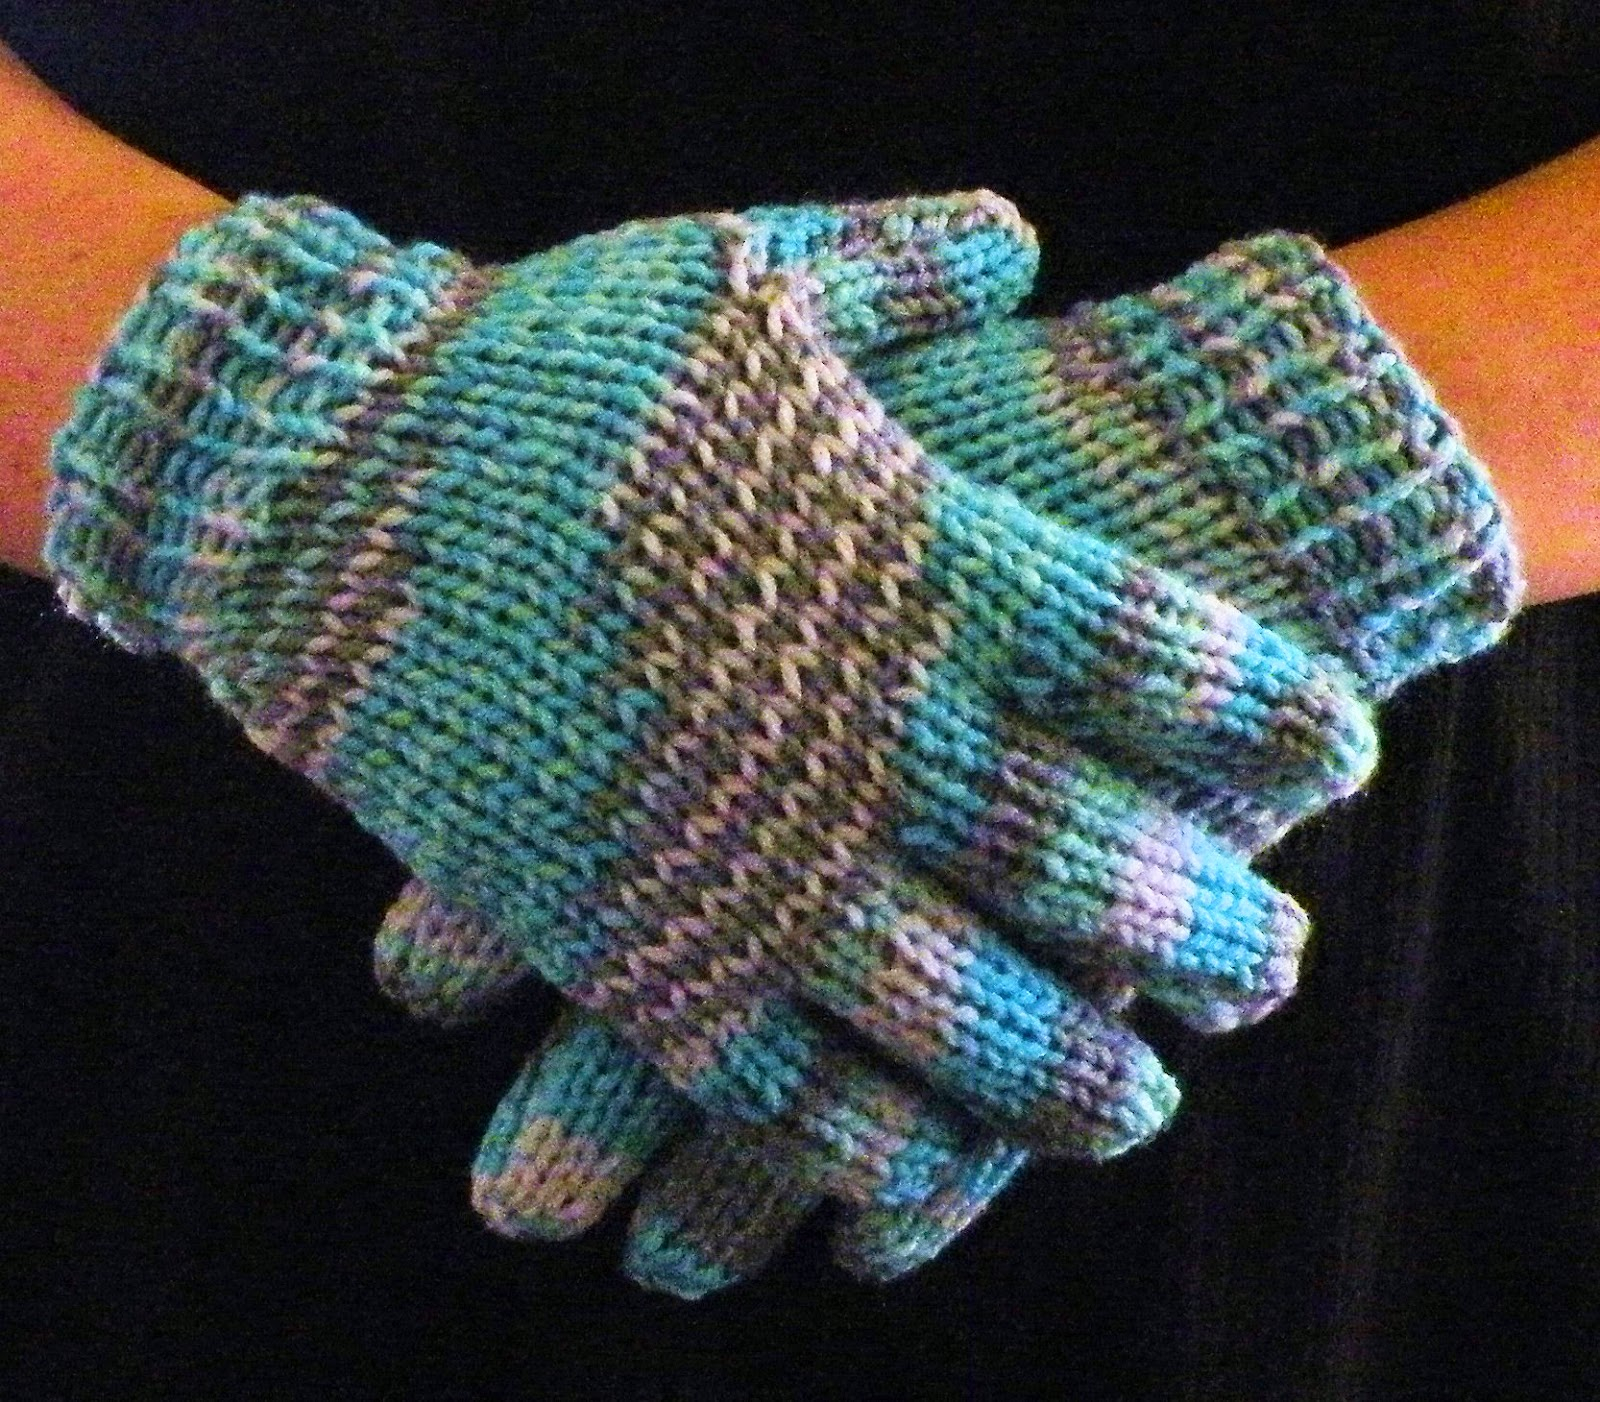 Circular Loom Knitting Patterns The Loom Muse How To Loom Knit Gloves Round Loom